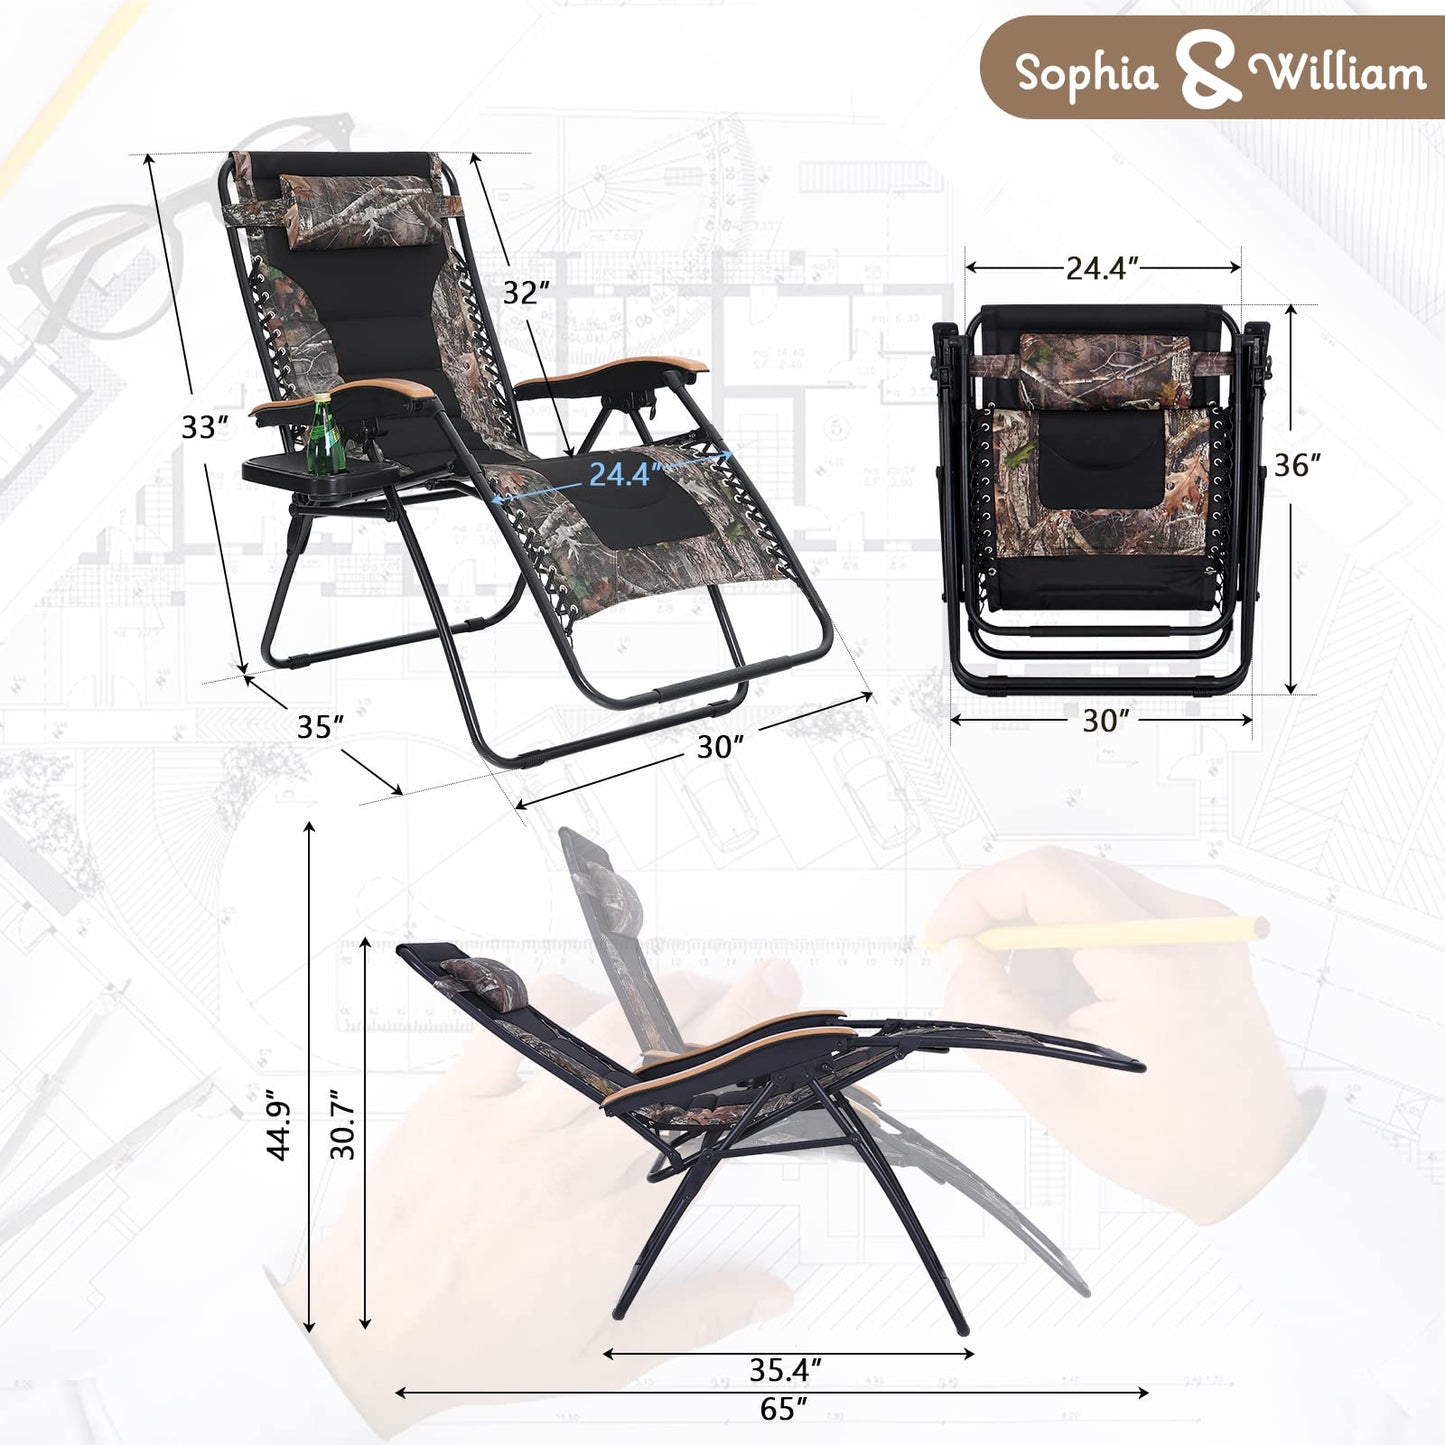 Sophia & William Oversized XL Zero Gravity Recliner Chair Set of 2 Padded Adjustable Folding Reclining Lounge Chair with Wide Armrest and Cup Holder, Support 400 LBS, Camouflage 2 Pack